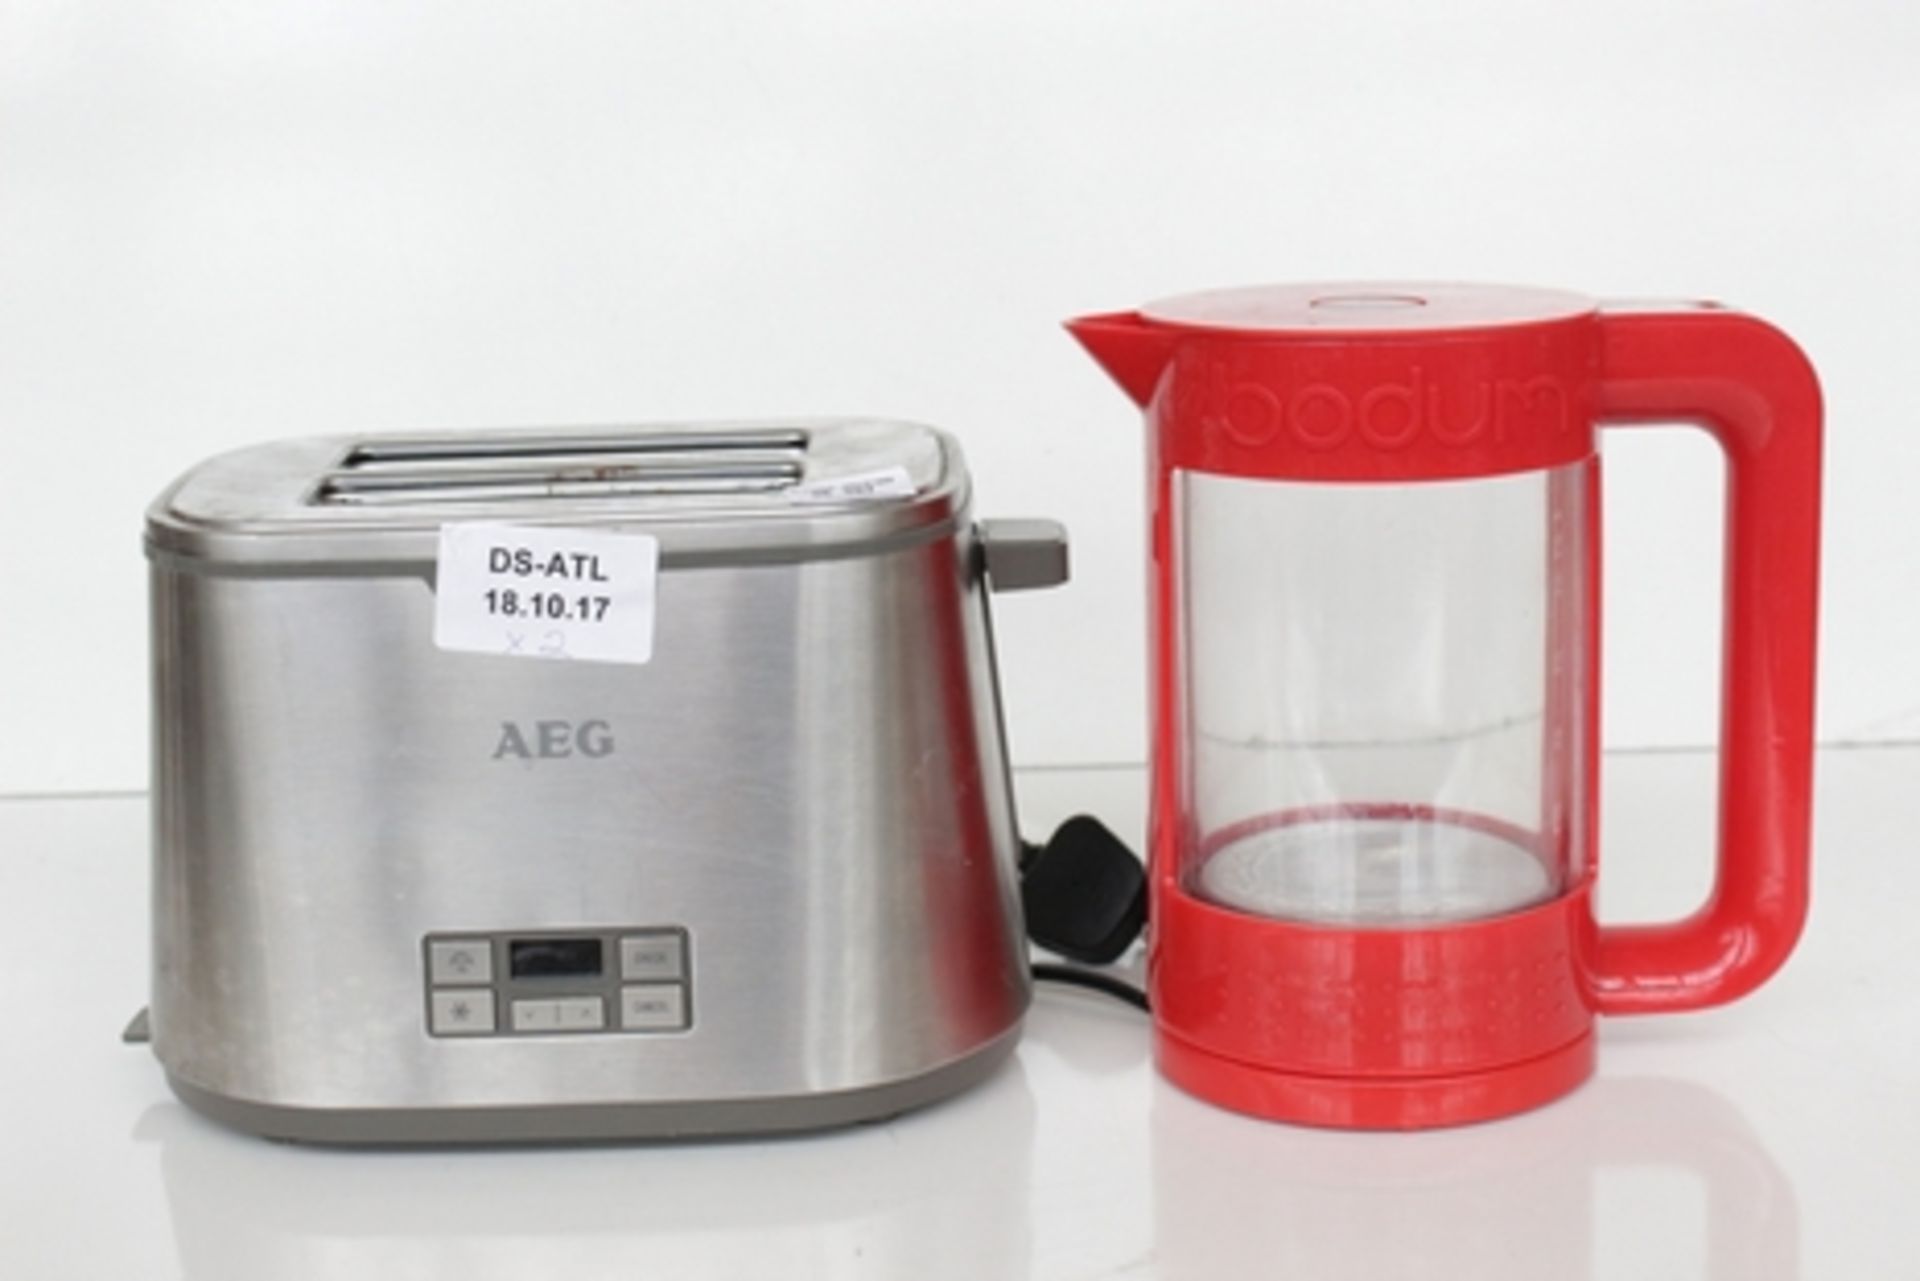 1 LOT TO CONTAIN 2 ITEMS TO INCLUDE AEG 2 SLICE TOASTER & BODEN KETTLE (DS-ATL) (18/10/17)